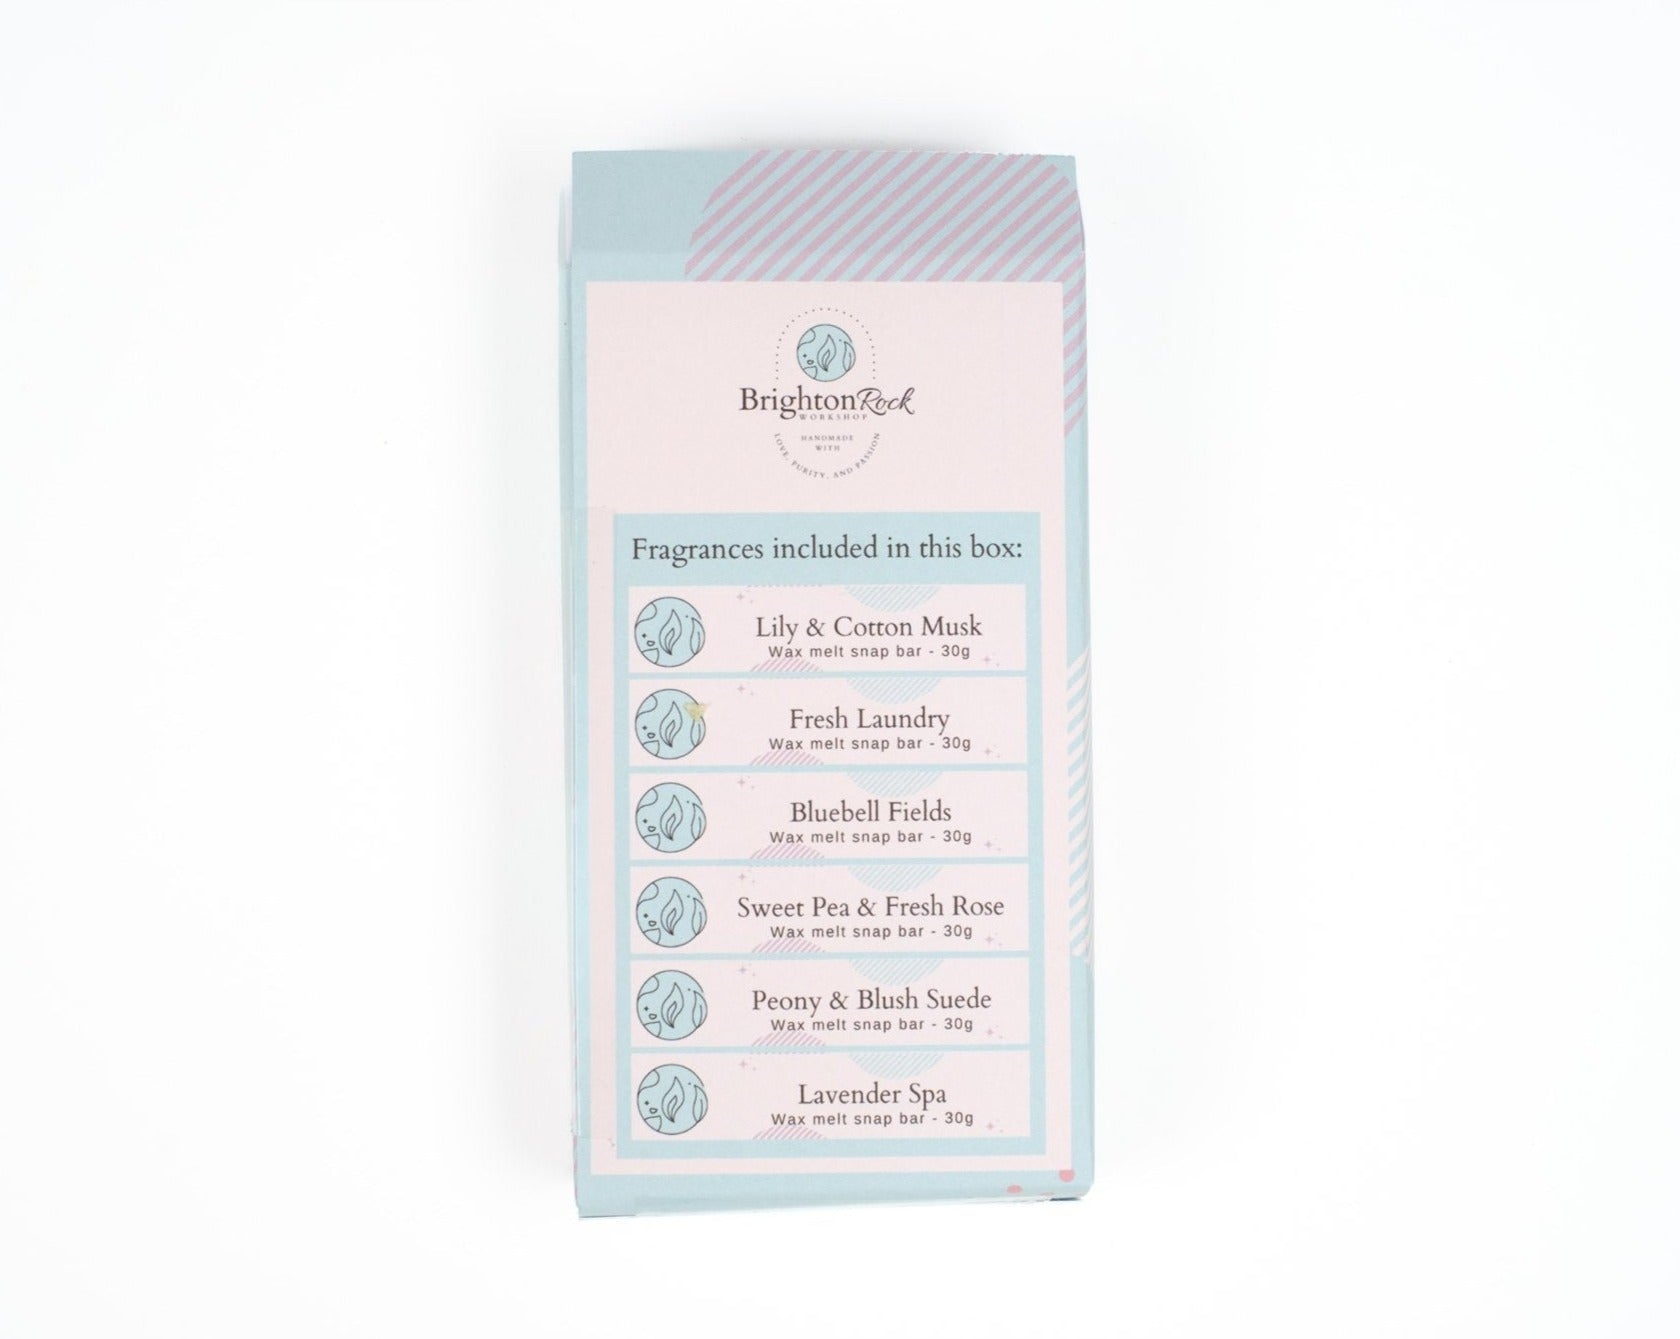 Floral fragrances Brighton Rock Workshop wax melt snap bar selection box. enjoy 6 x 30 gram bars in our best selling floral scents. Eco friendly product and packaging. sustainable, vegan friendly and cruelty free. back of box